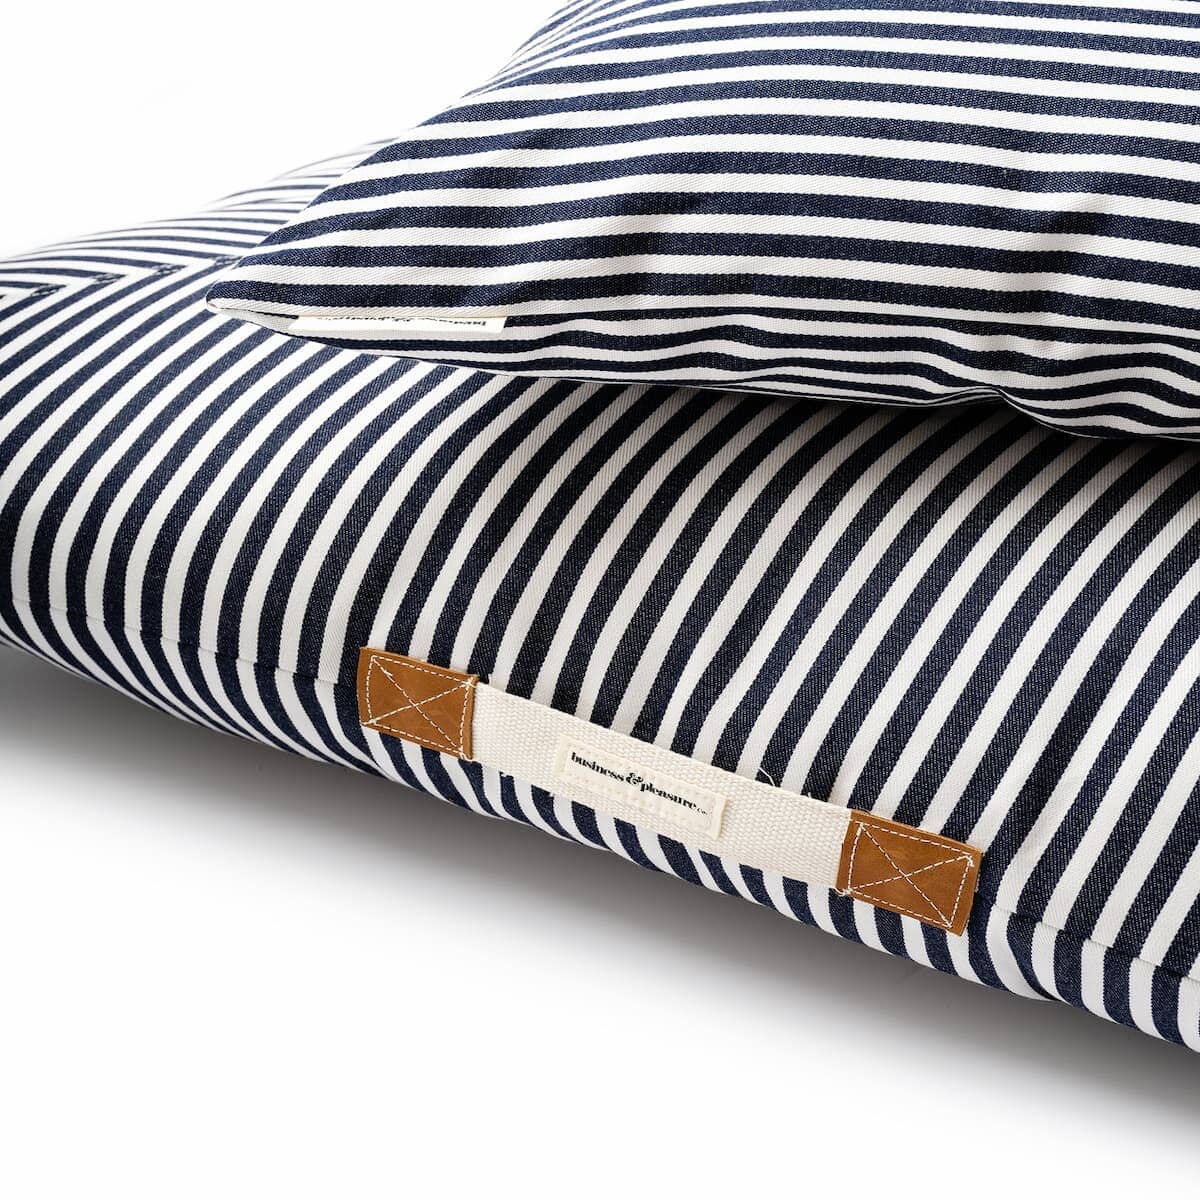 zoomed in studio image of navy stripe euro pillow and floor pillow handle